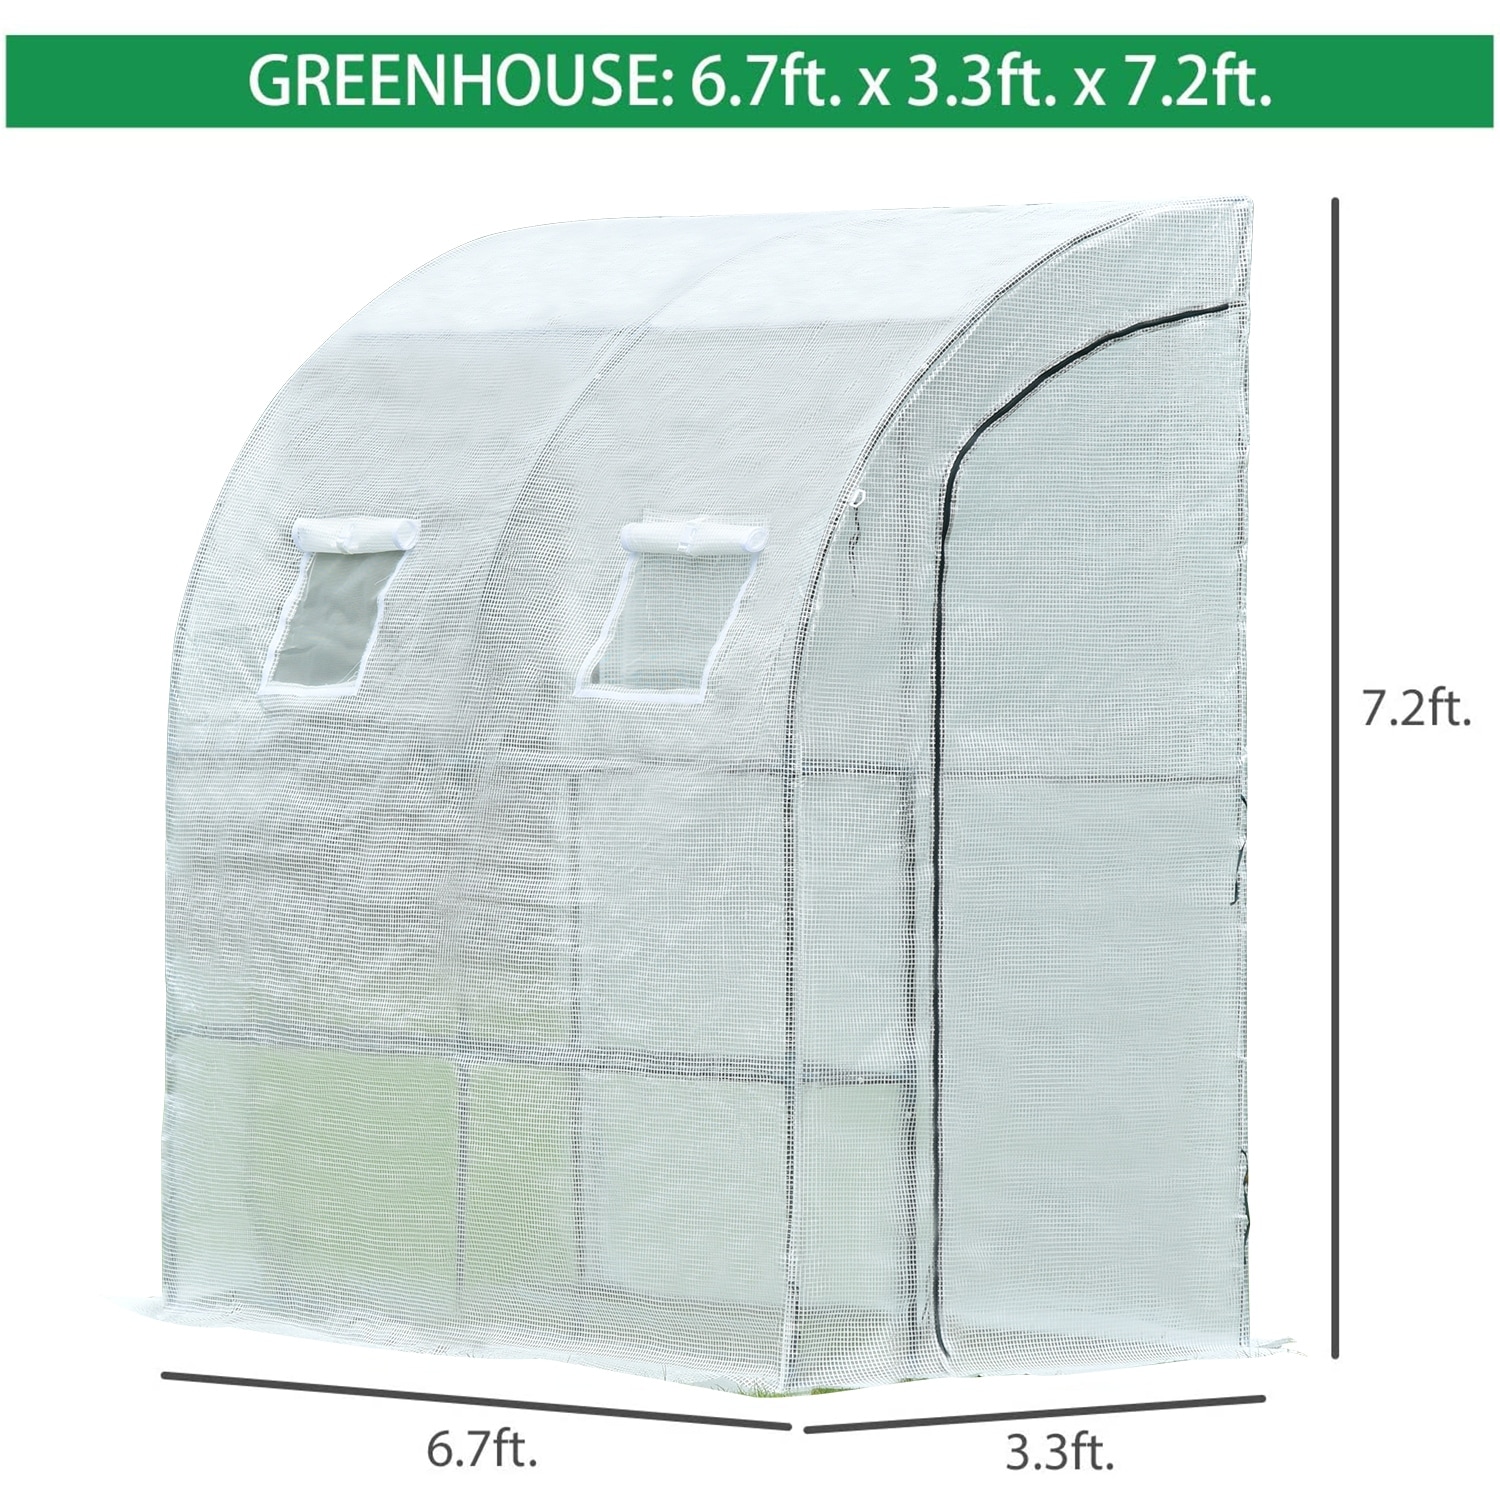 Aoodor Lean-to Wall Greenhouse PE Cover Portable UV Protected 6.3ft. x 3.3ft. x 7.2ft. - White - 6.3 x 3.3 x 7.2 ft